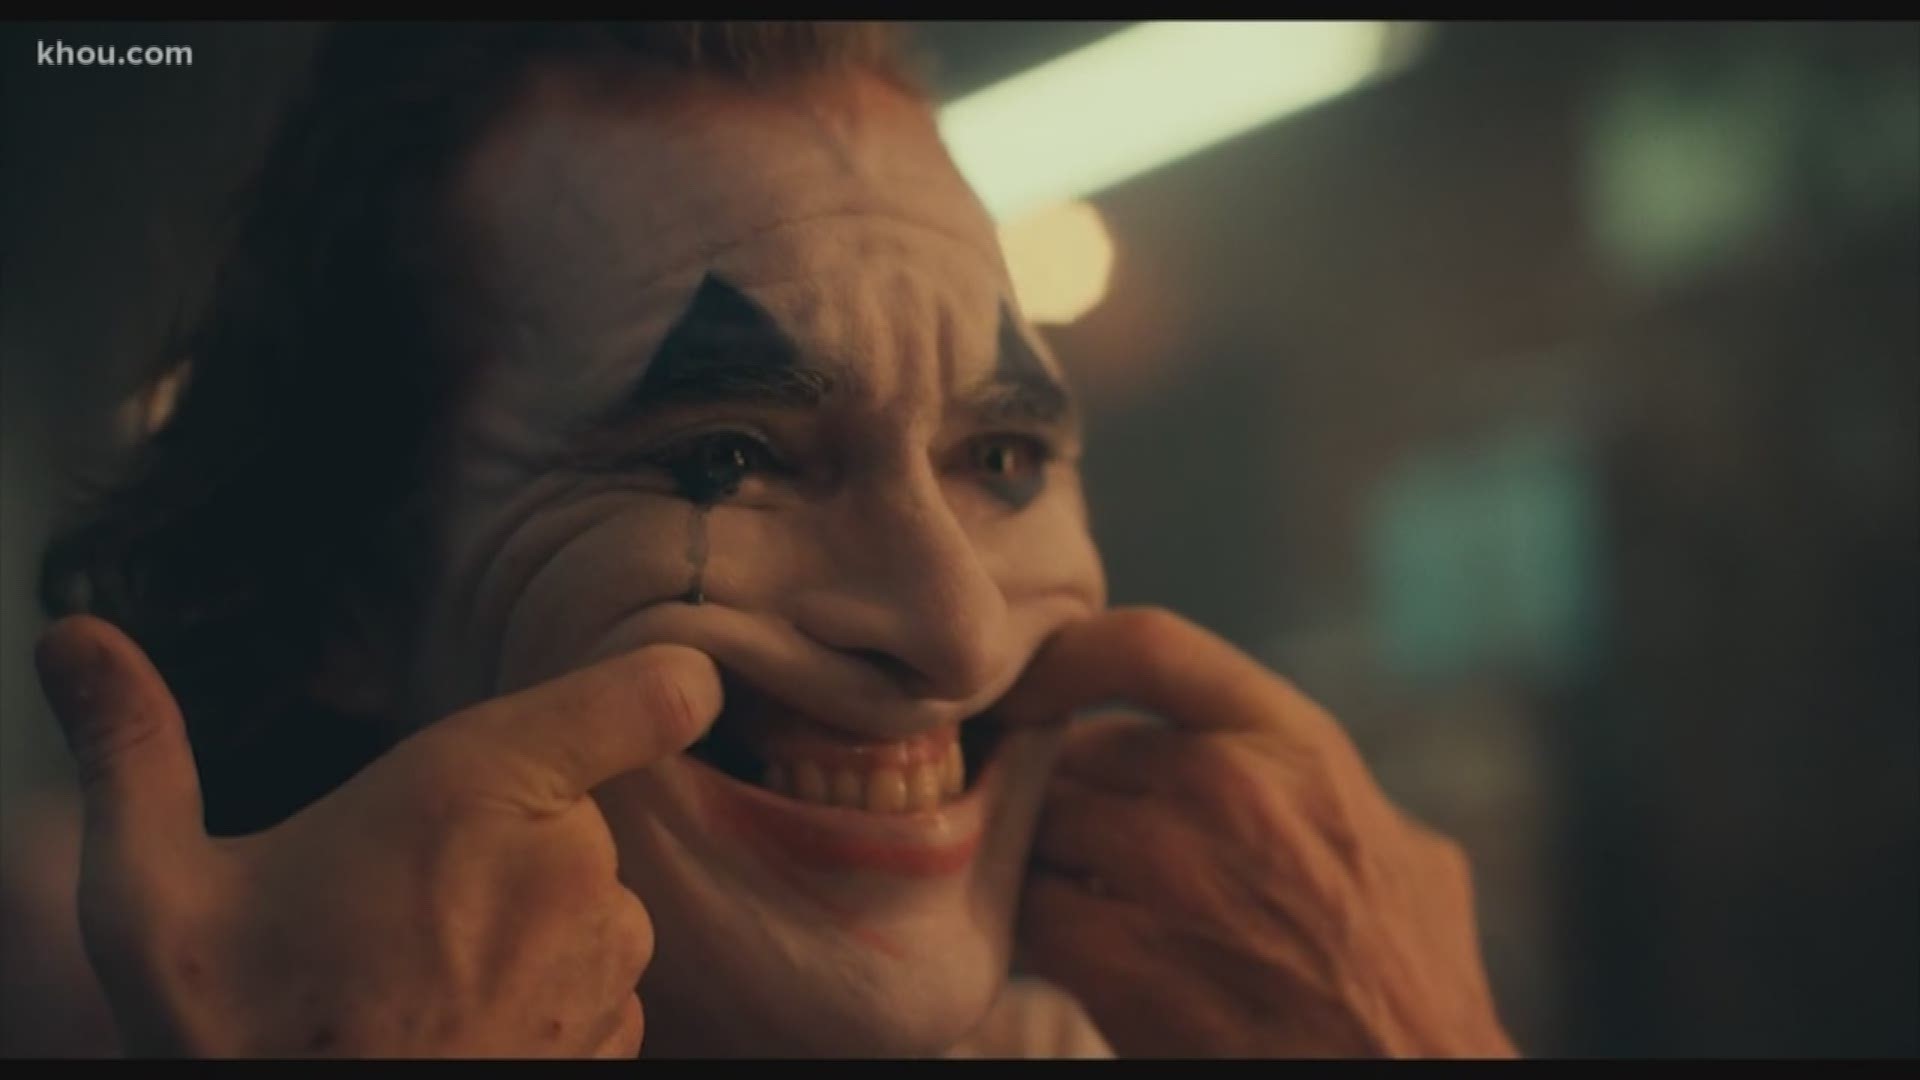 It's been on movie fans' radars for weeks, and it's already getting Oscar buzz. “Joker” hits theaters Thursday, but the film is also stirring up controversy.